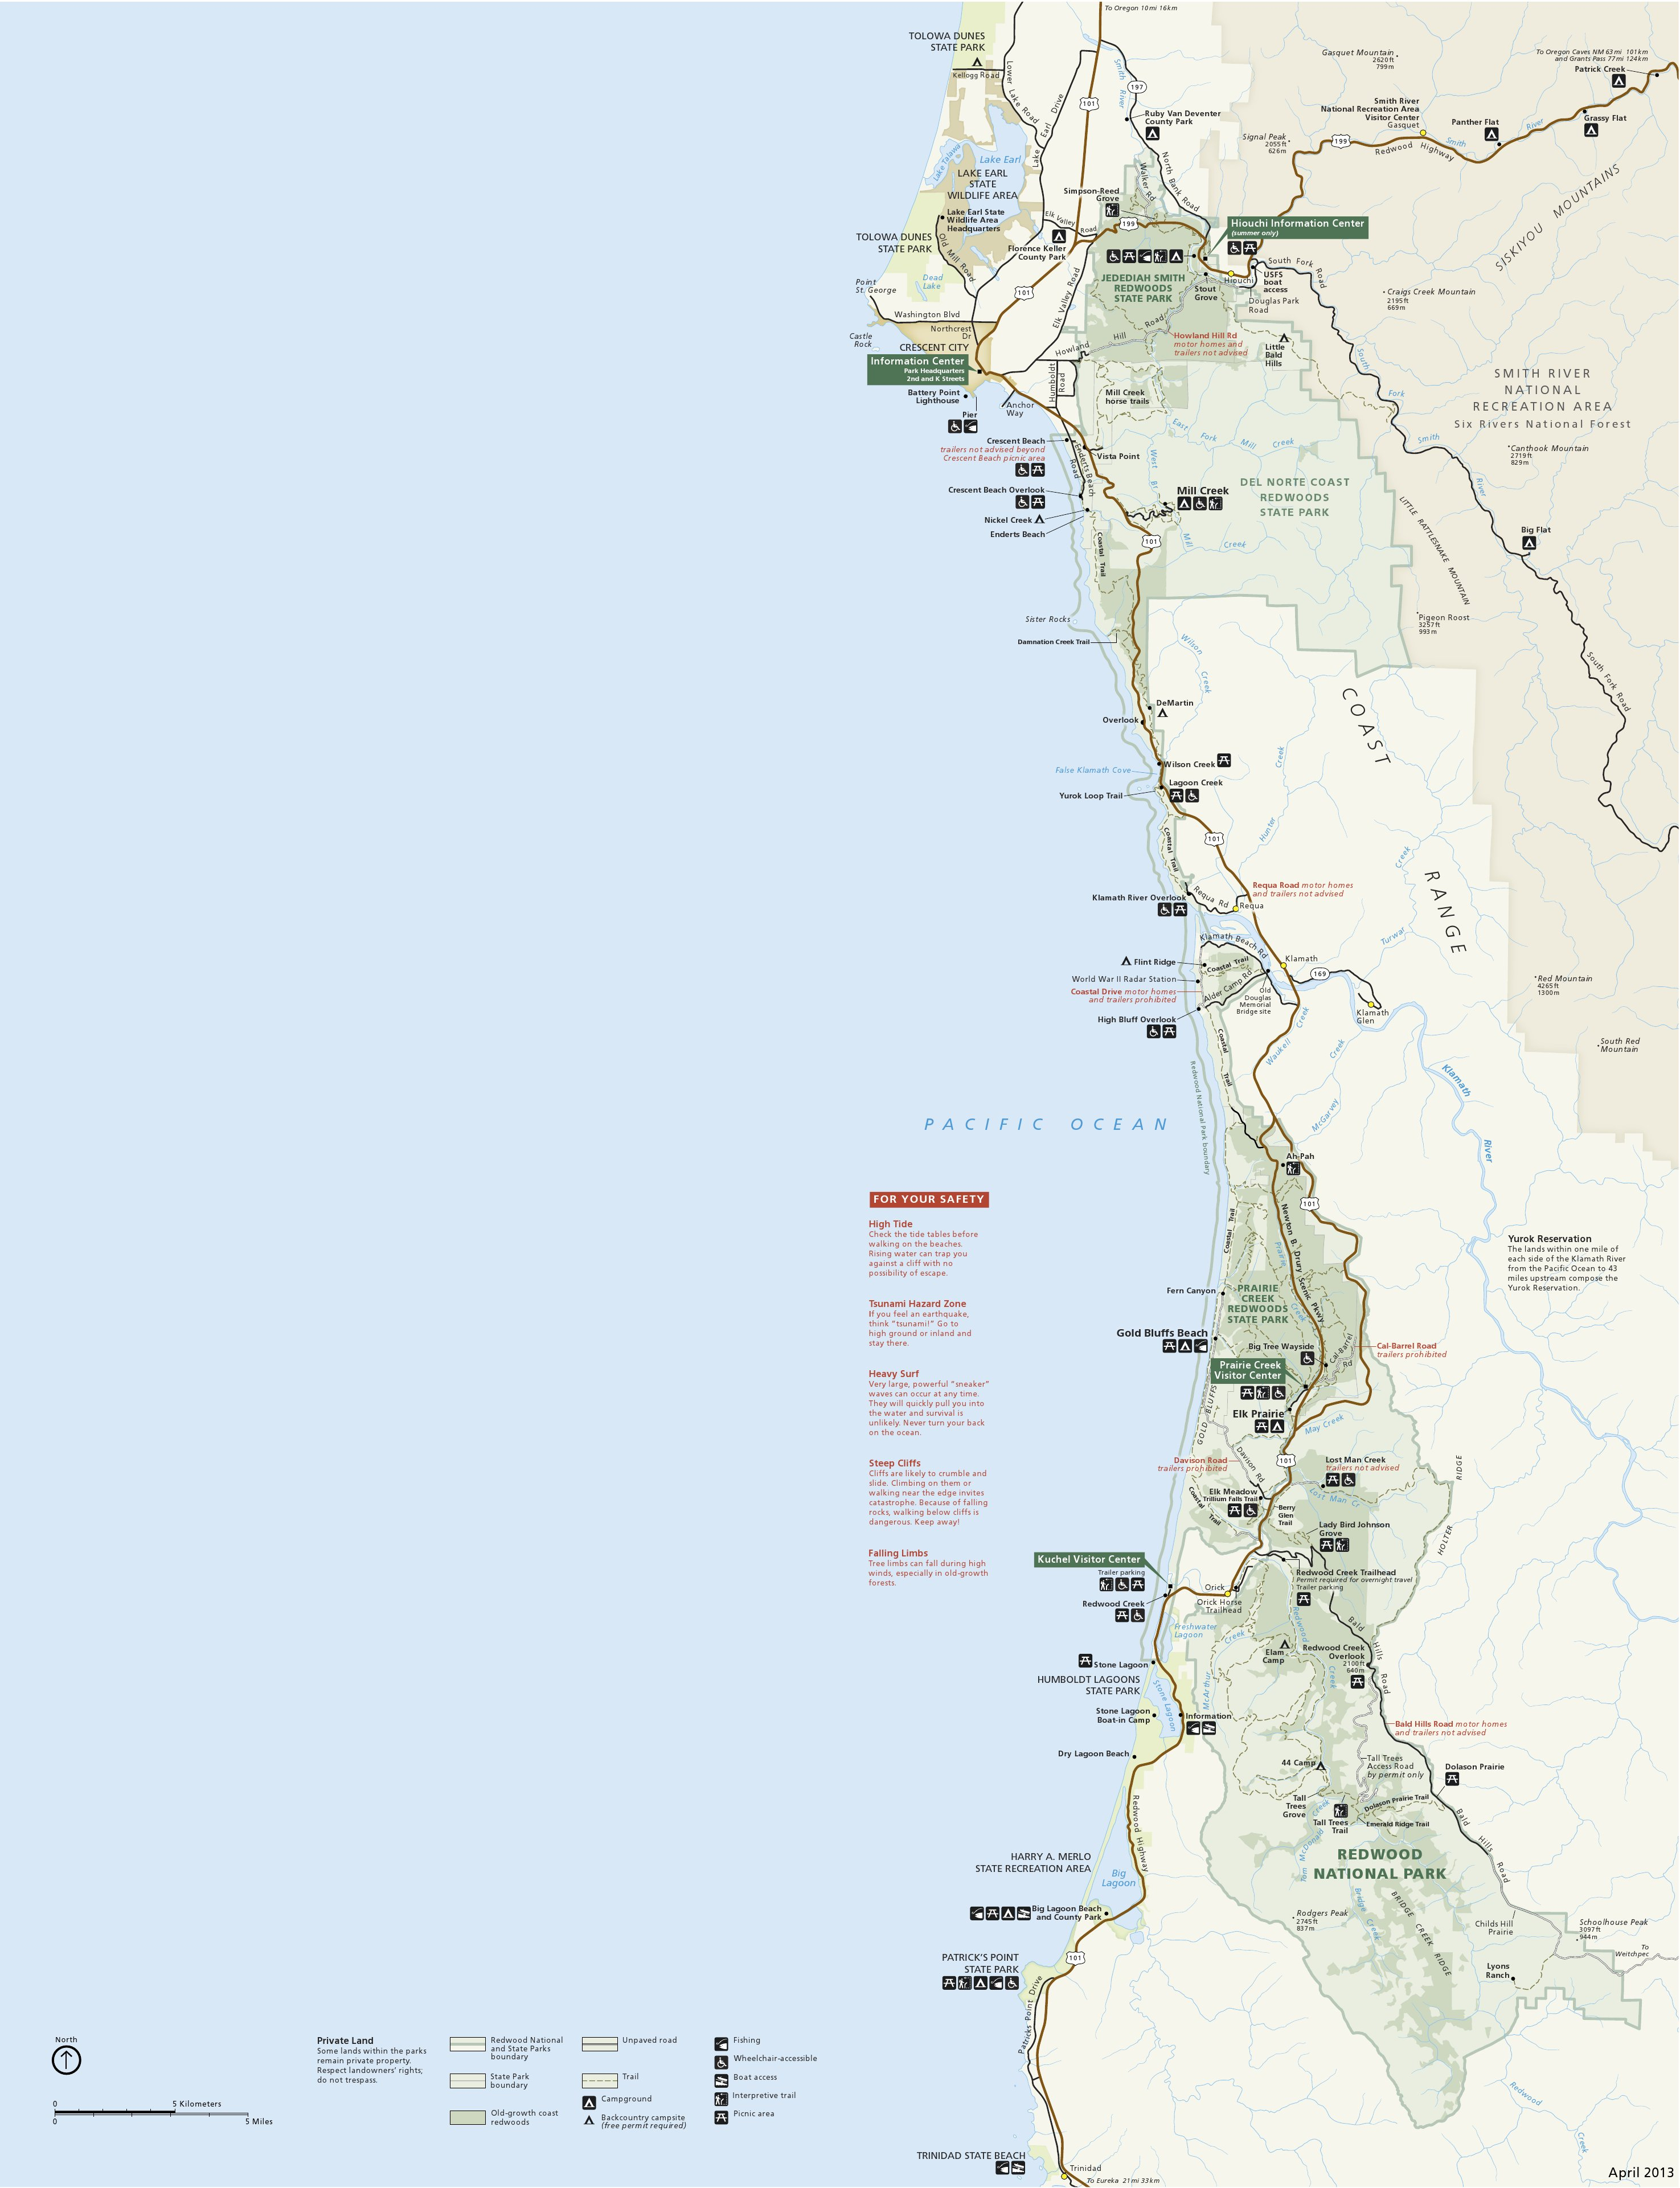 Redwood Maps | Npmaps - Just Free Maps, Period. - California Redwoods Map